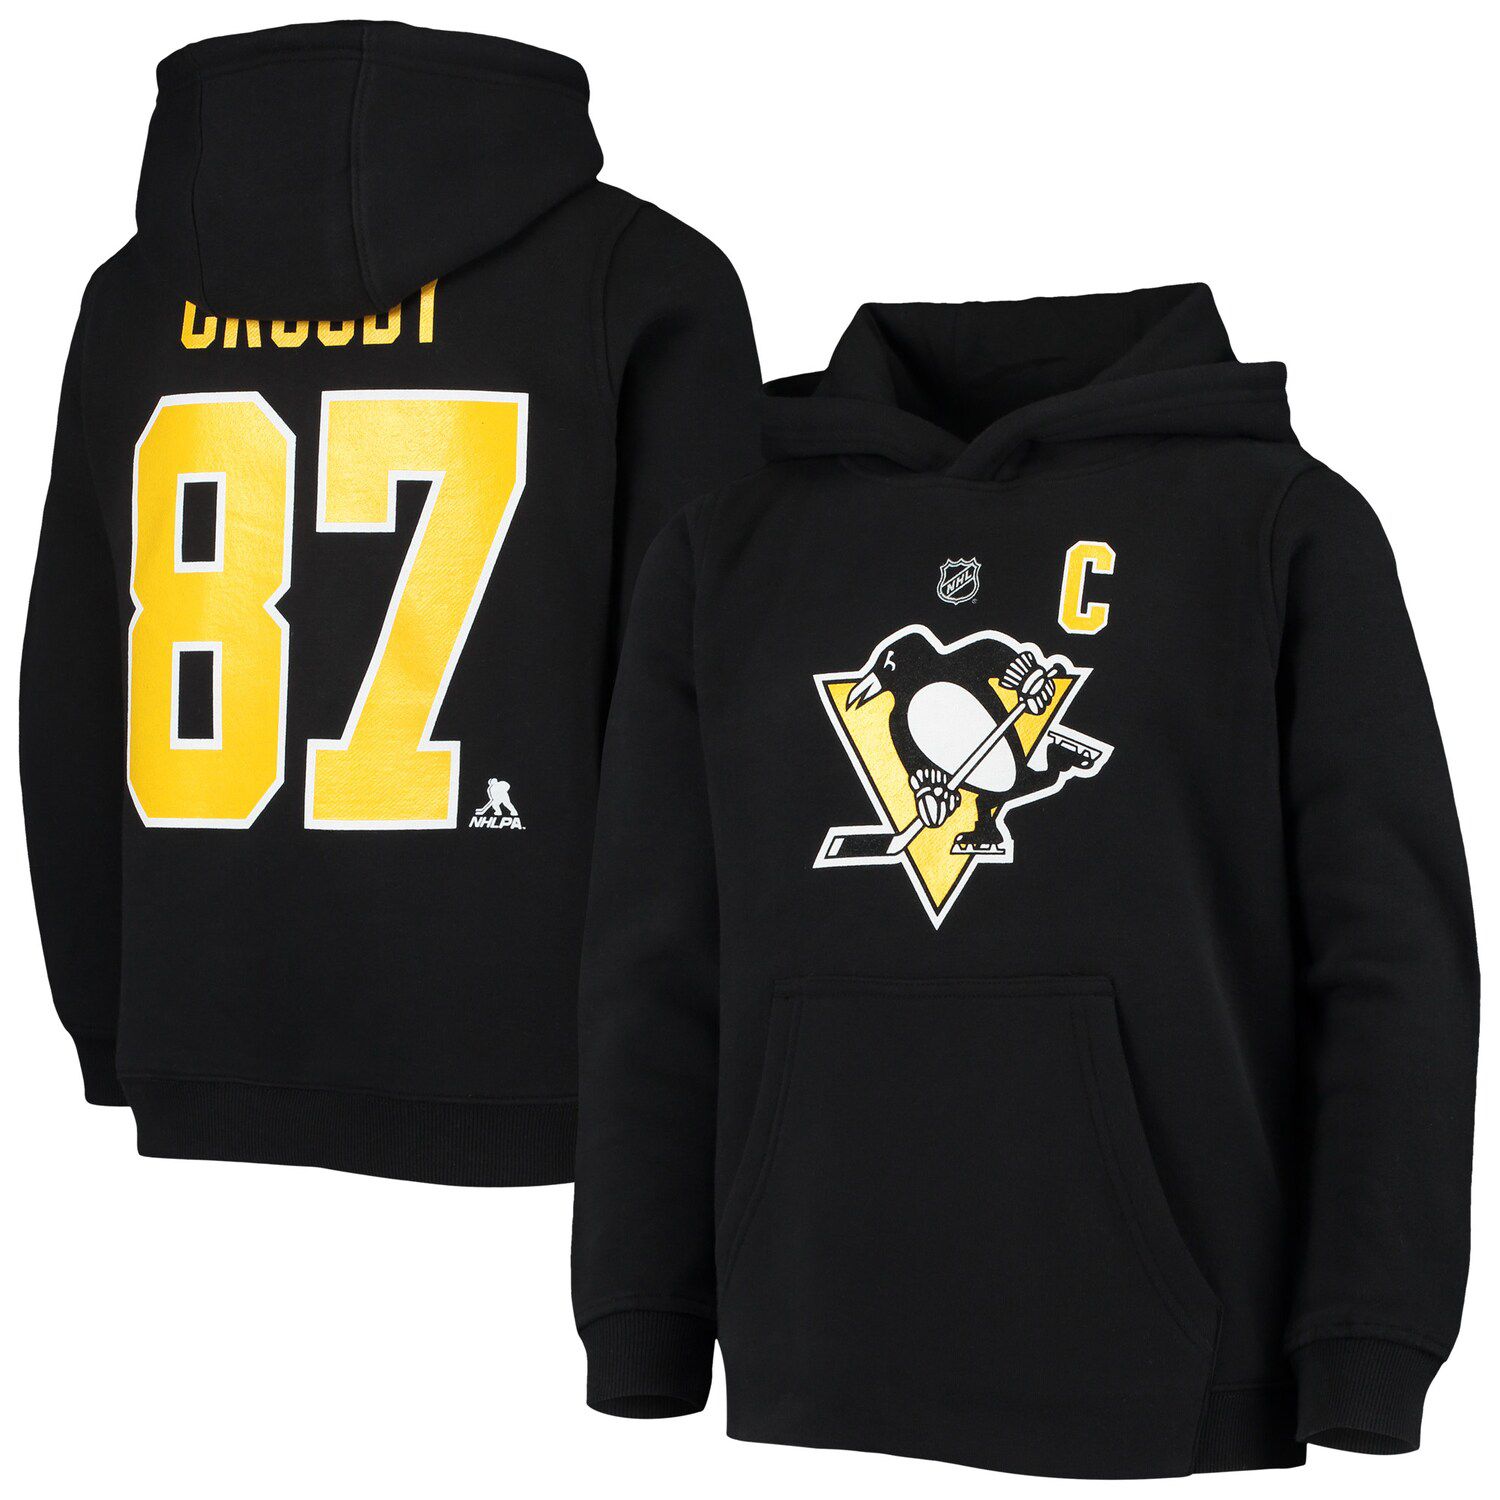 pittsburgh penguins under armour